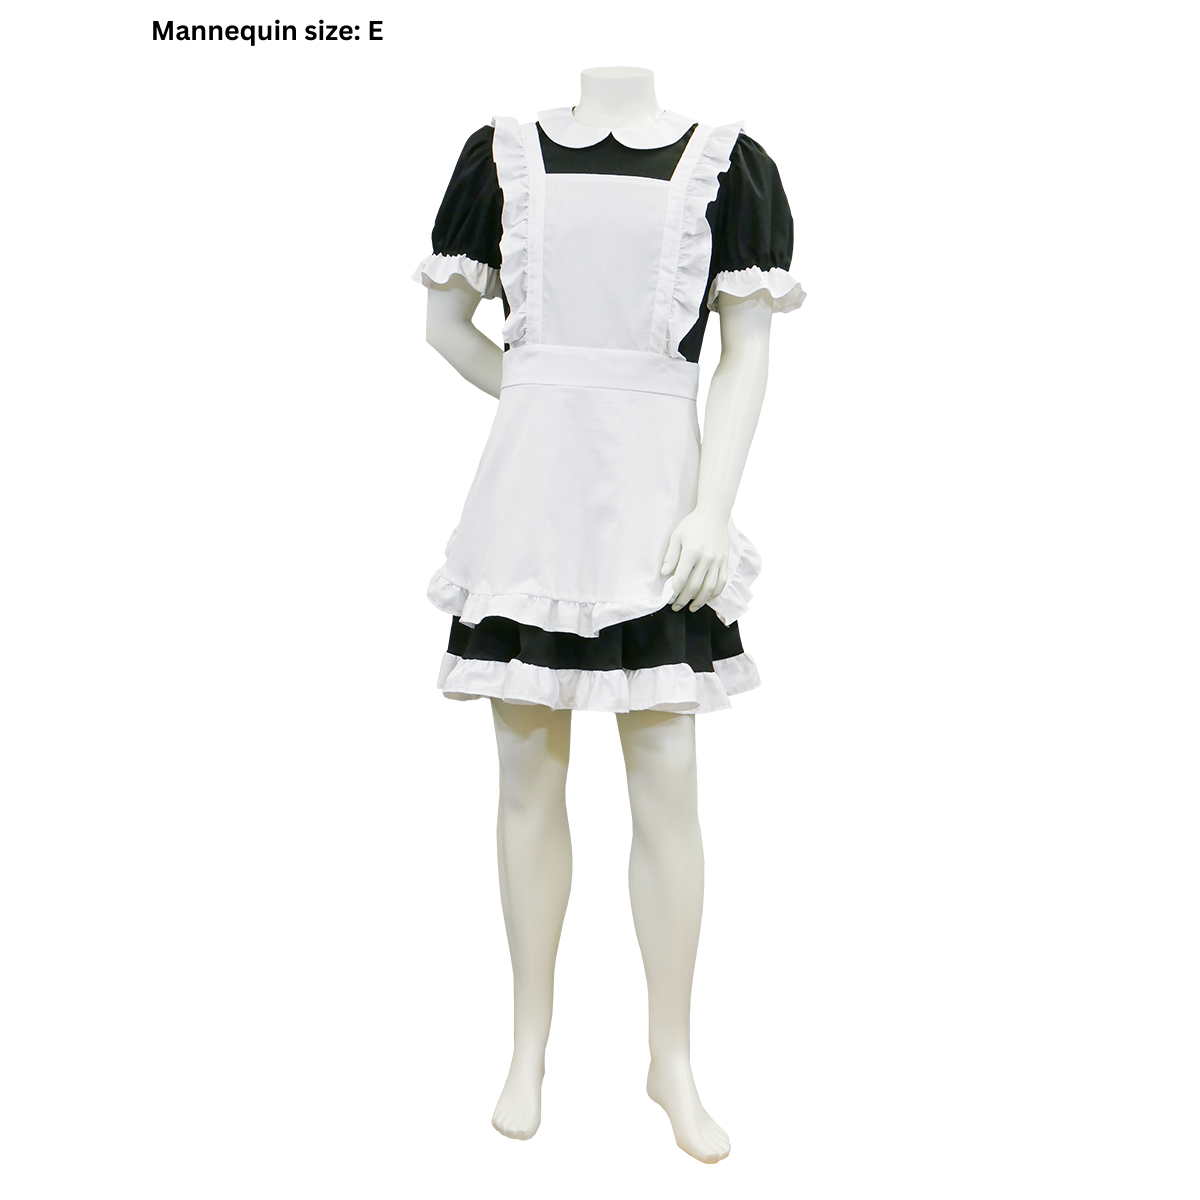 A completed FSCO Maid Outfit (m) on  a male mannequin in size E. The garment consists of a black dress with white ruffle and apron. The neckline of the apron is square and the silhouette of both is A-line.